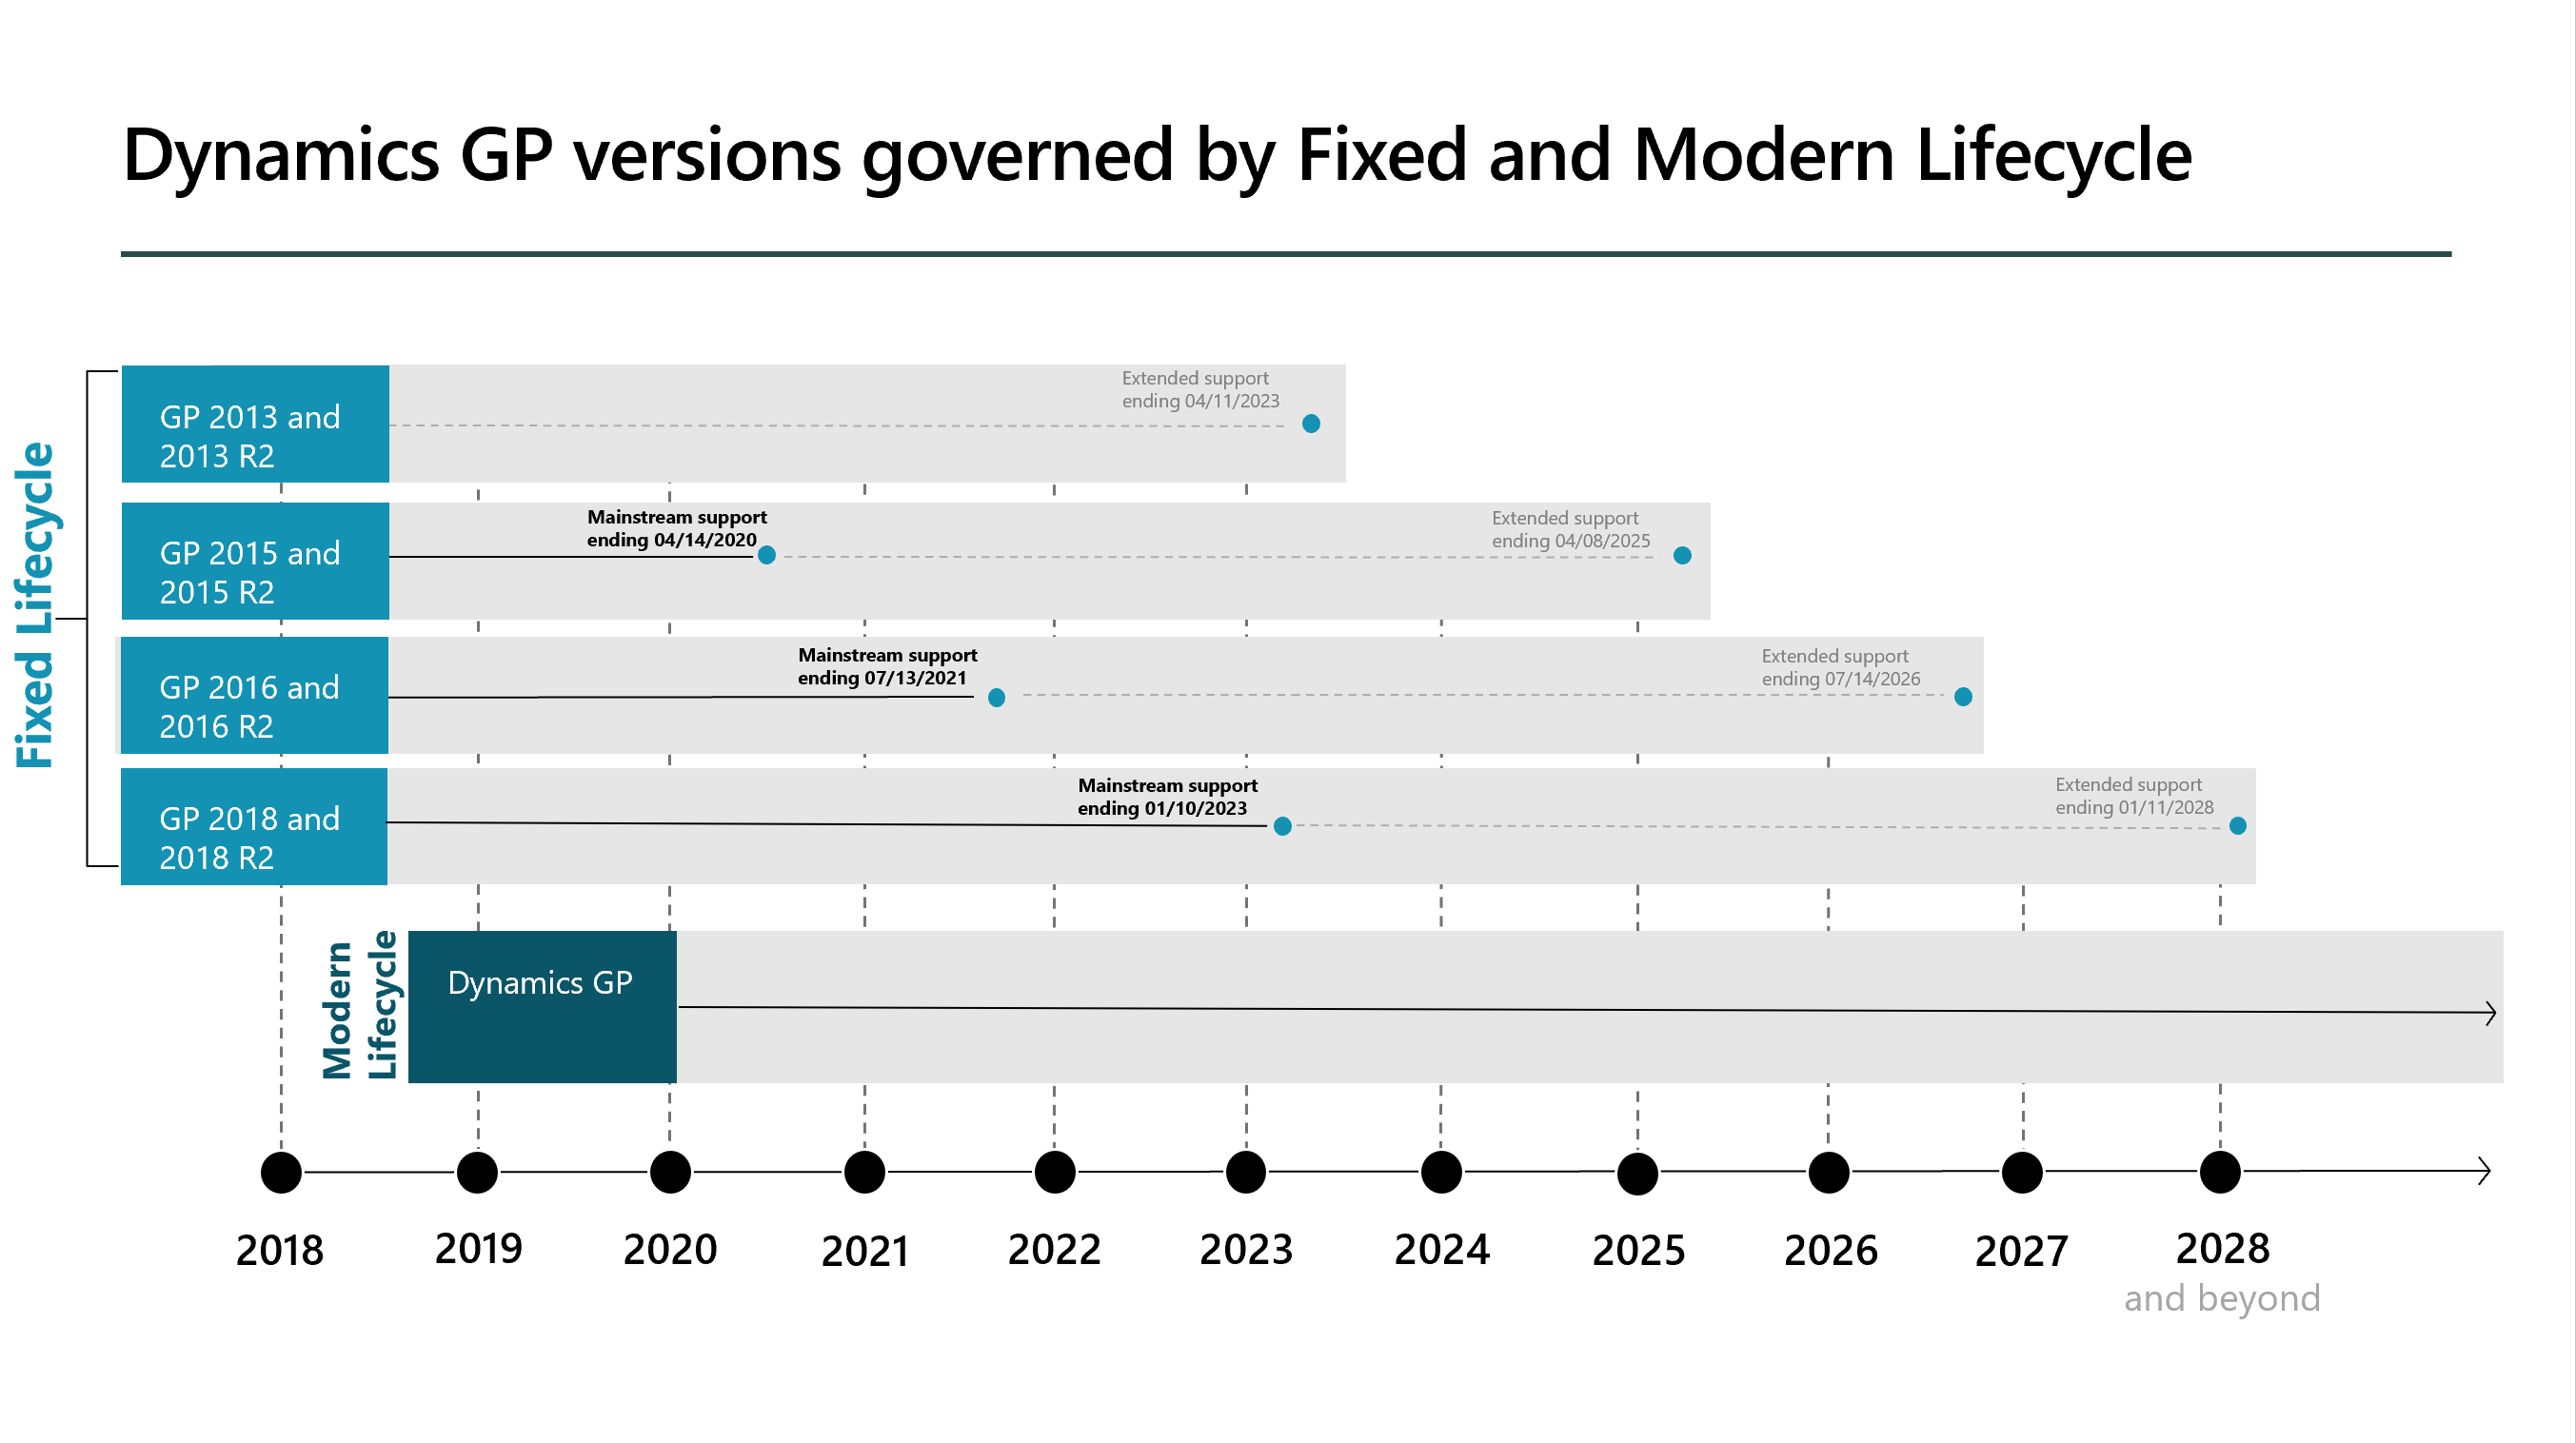 Microsoft Dynamics GP versions governed by Fixed and Modern Lifecycle